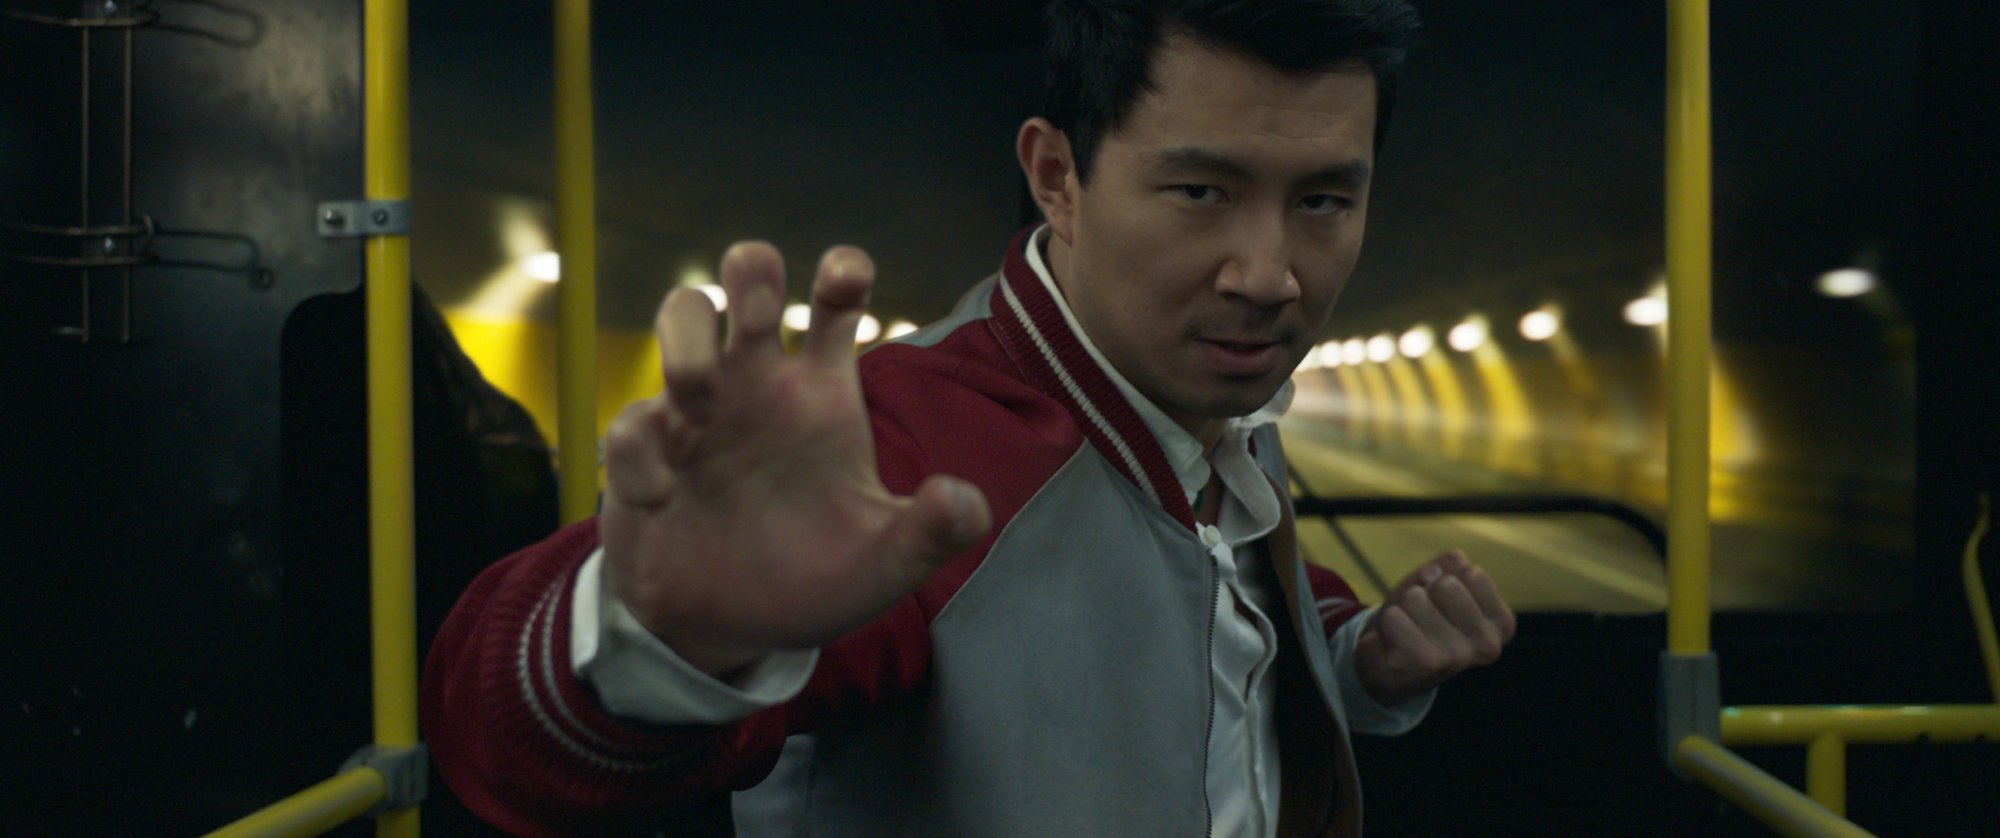 ‘Shang-Chi and the Legend of the Ten Rings’ Movie Review: Not Your Typical Superhero Movie